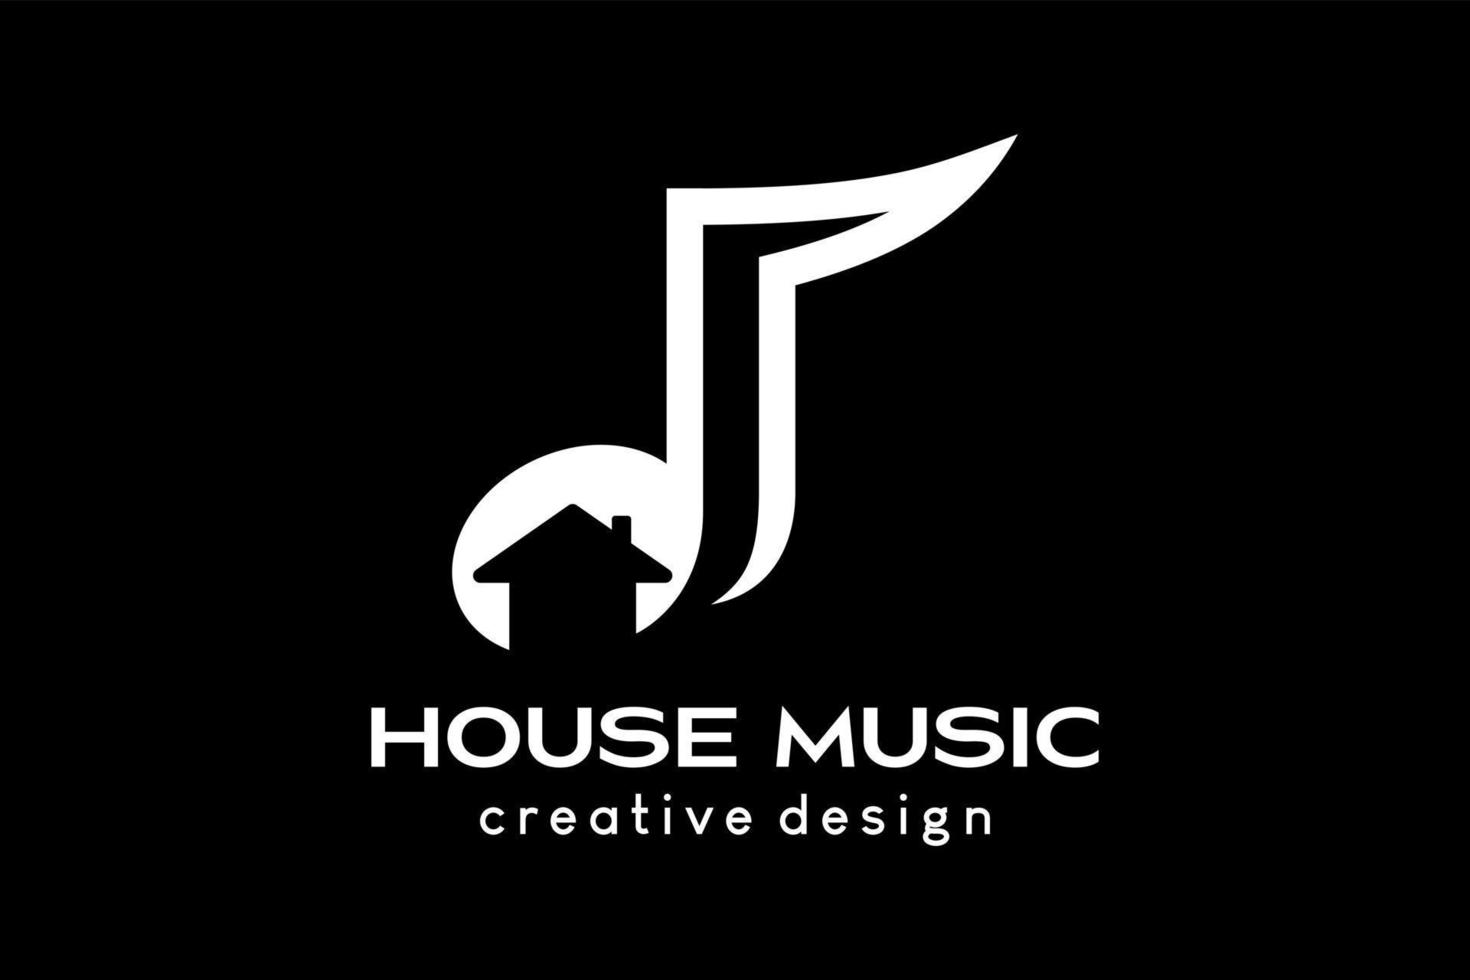 Music house logo design, tone icon combined with house icon in a creative concept vector